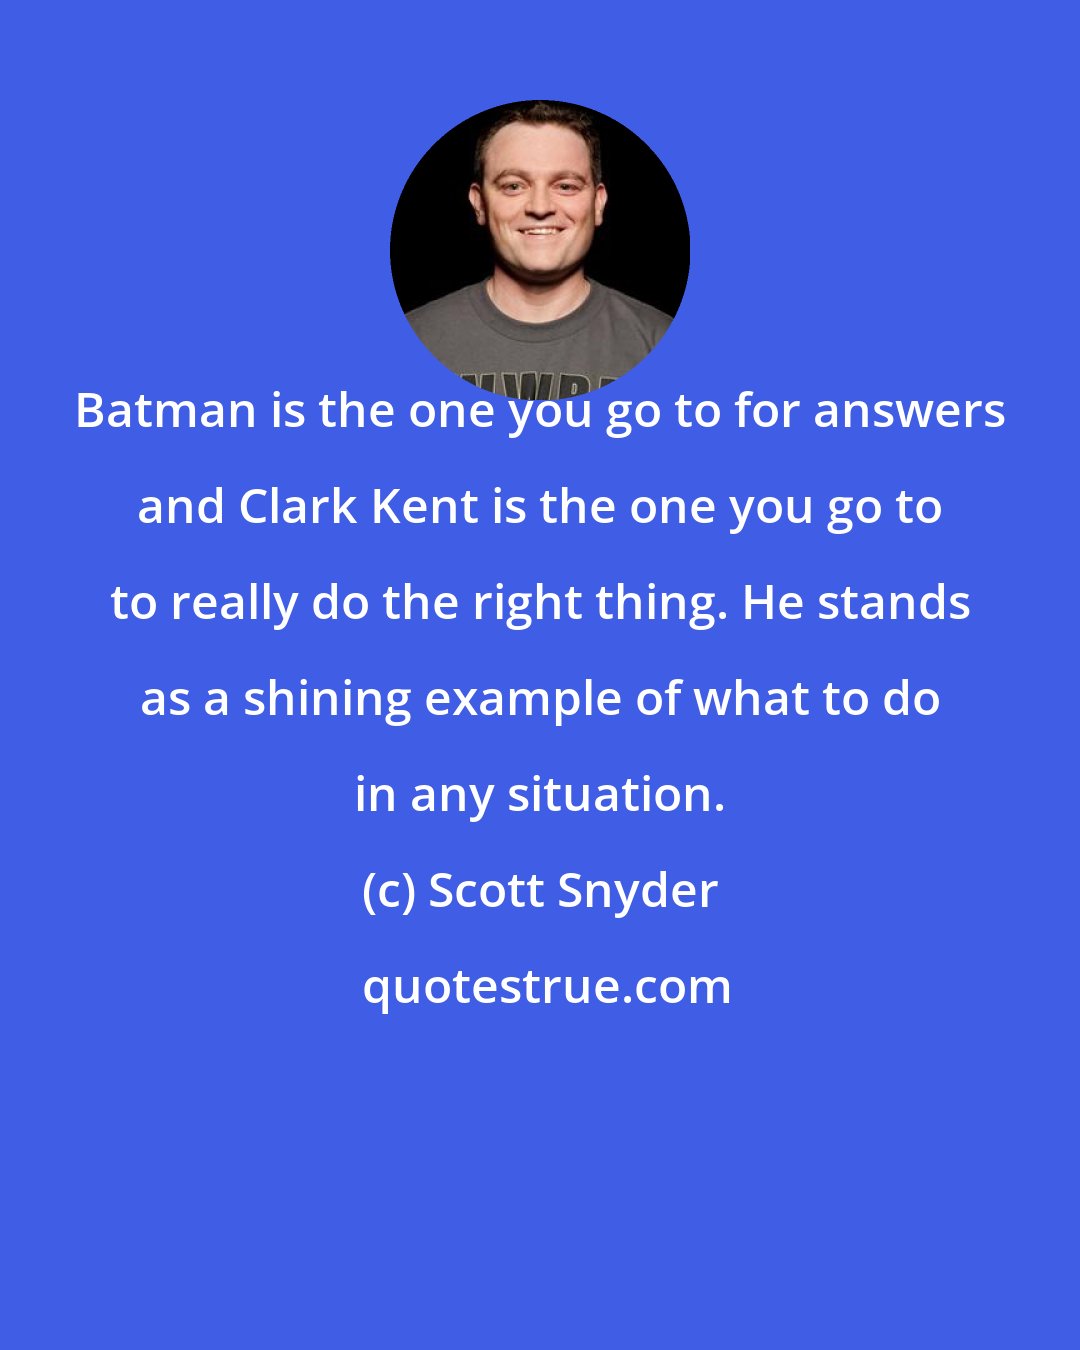 Scott Snyder: Batman is the one you go to for answers and Clark Kent is the one you go to to really do the right thing. He stands as a shining example of what to do in any situation.